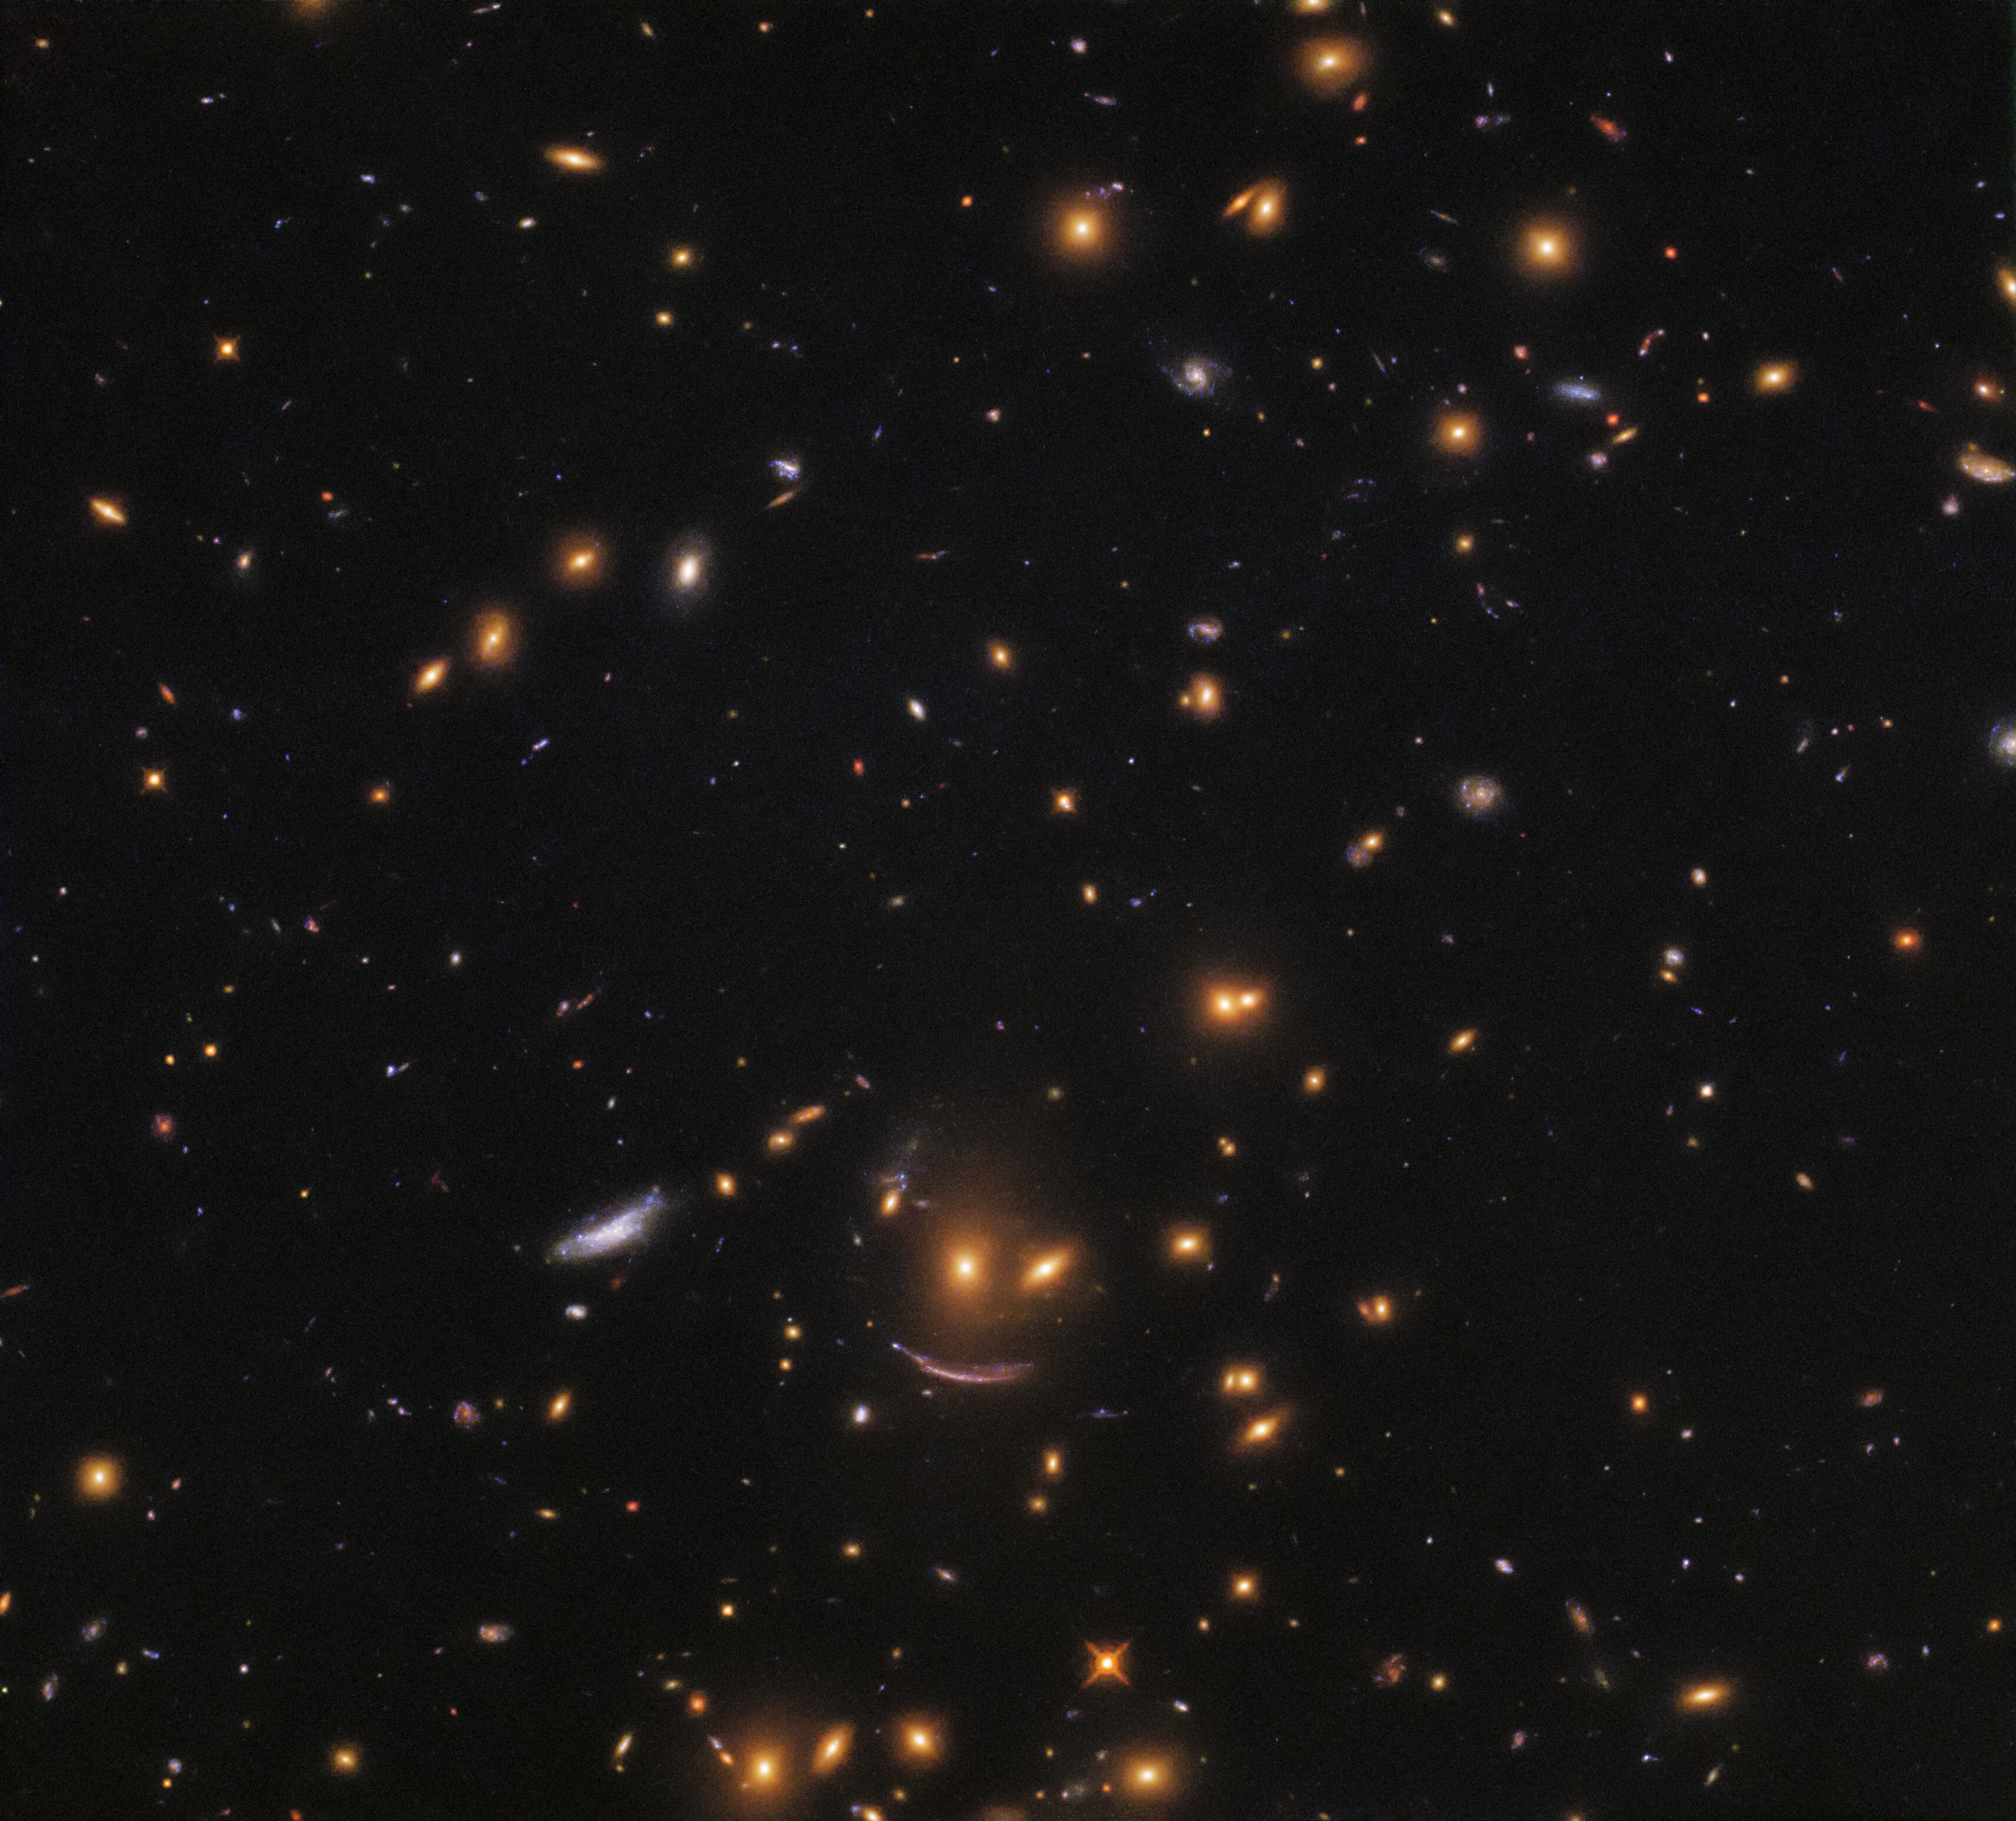 A smiley face is seen in a field of stars amid the black of space.